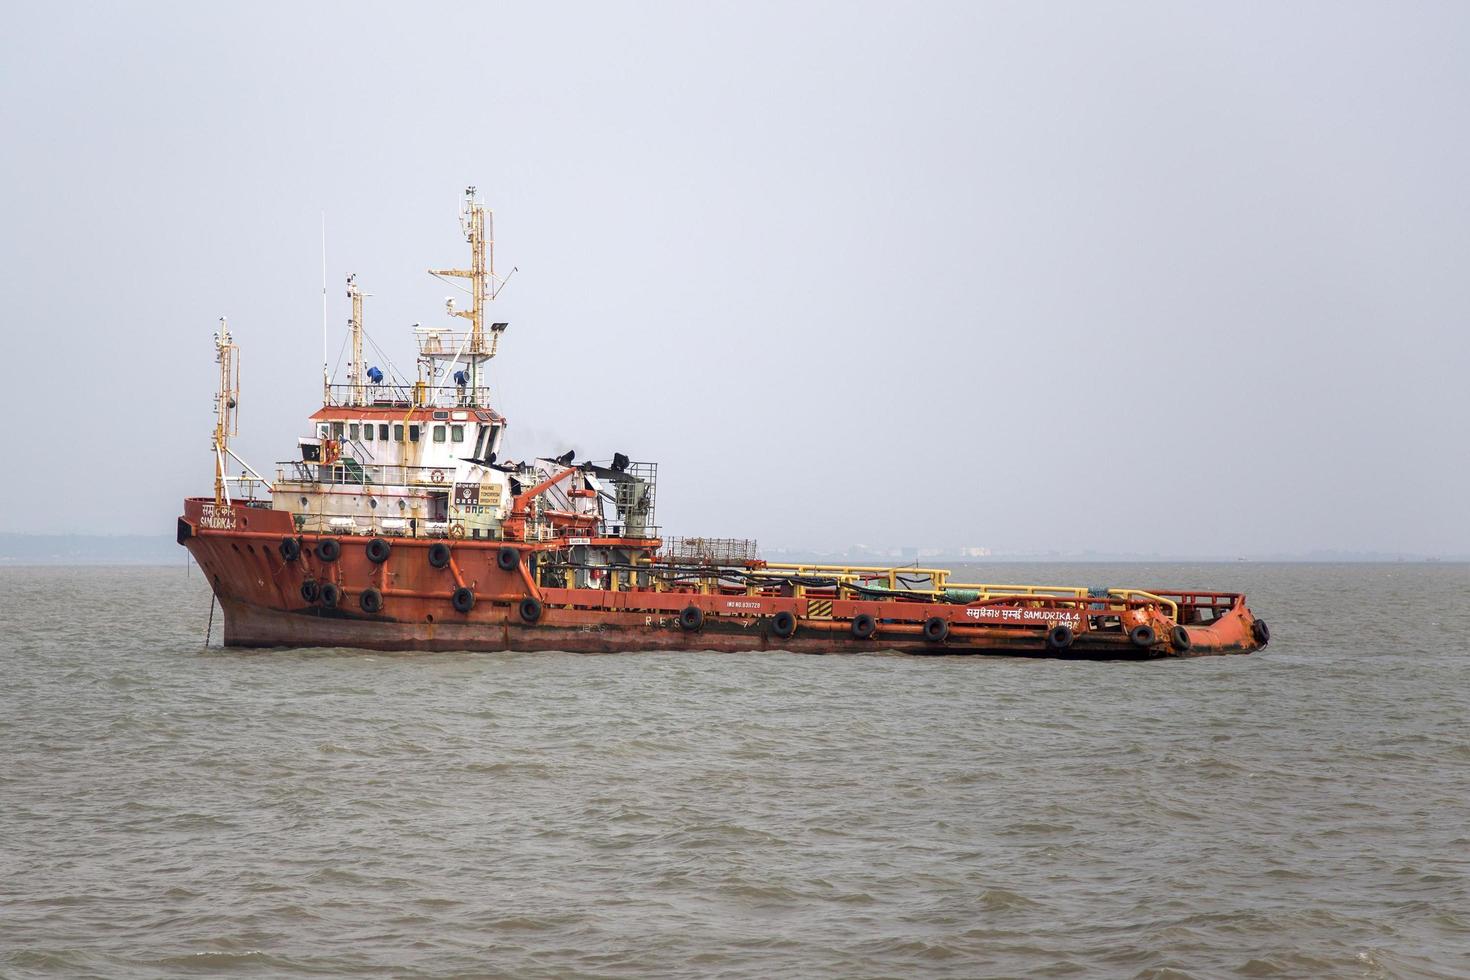 MUMBAI, INDIA, OCTOBER 11, 2015 - Industrial ship in the waters of Mumbai. The port and shipping industry employs many residents directly and indirectly. photo